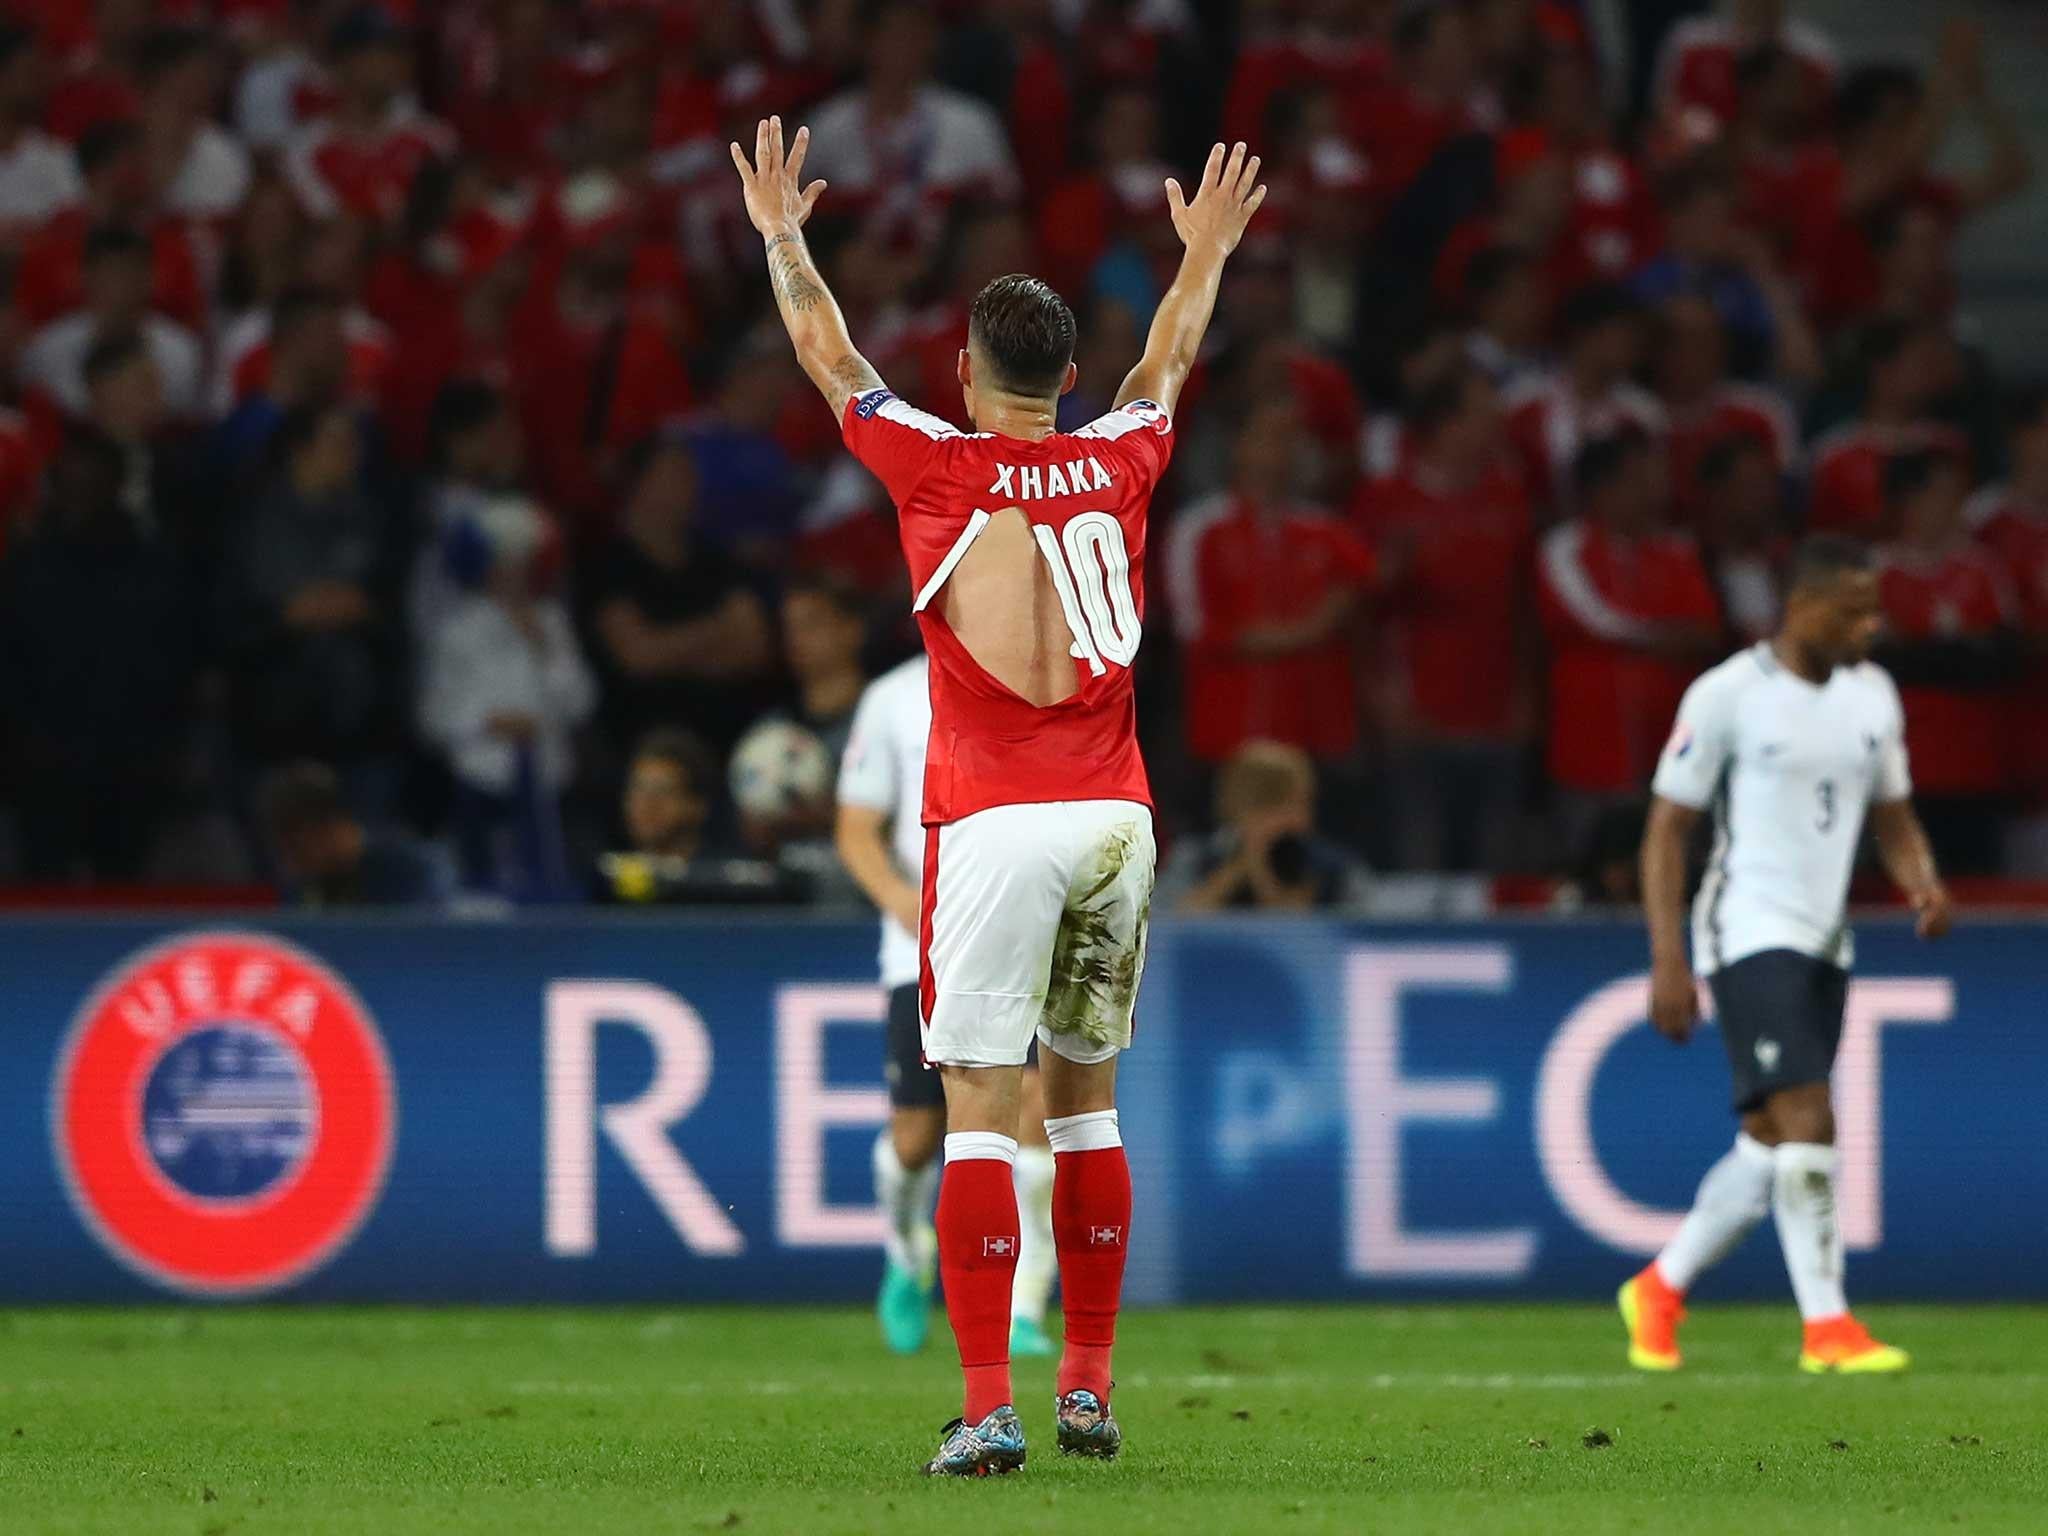 Granit Xhaka's shirt is clearly ripped during Switzerland's match with France